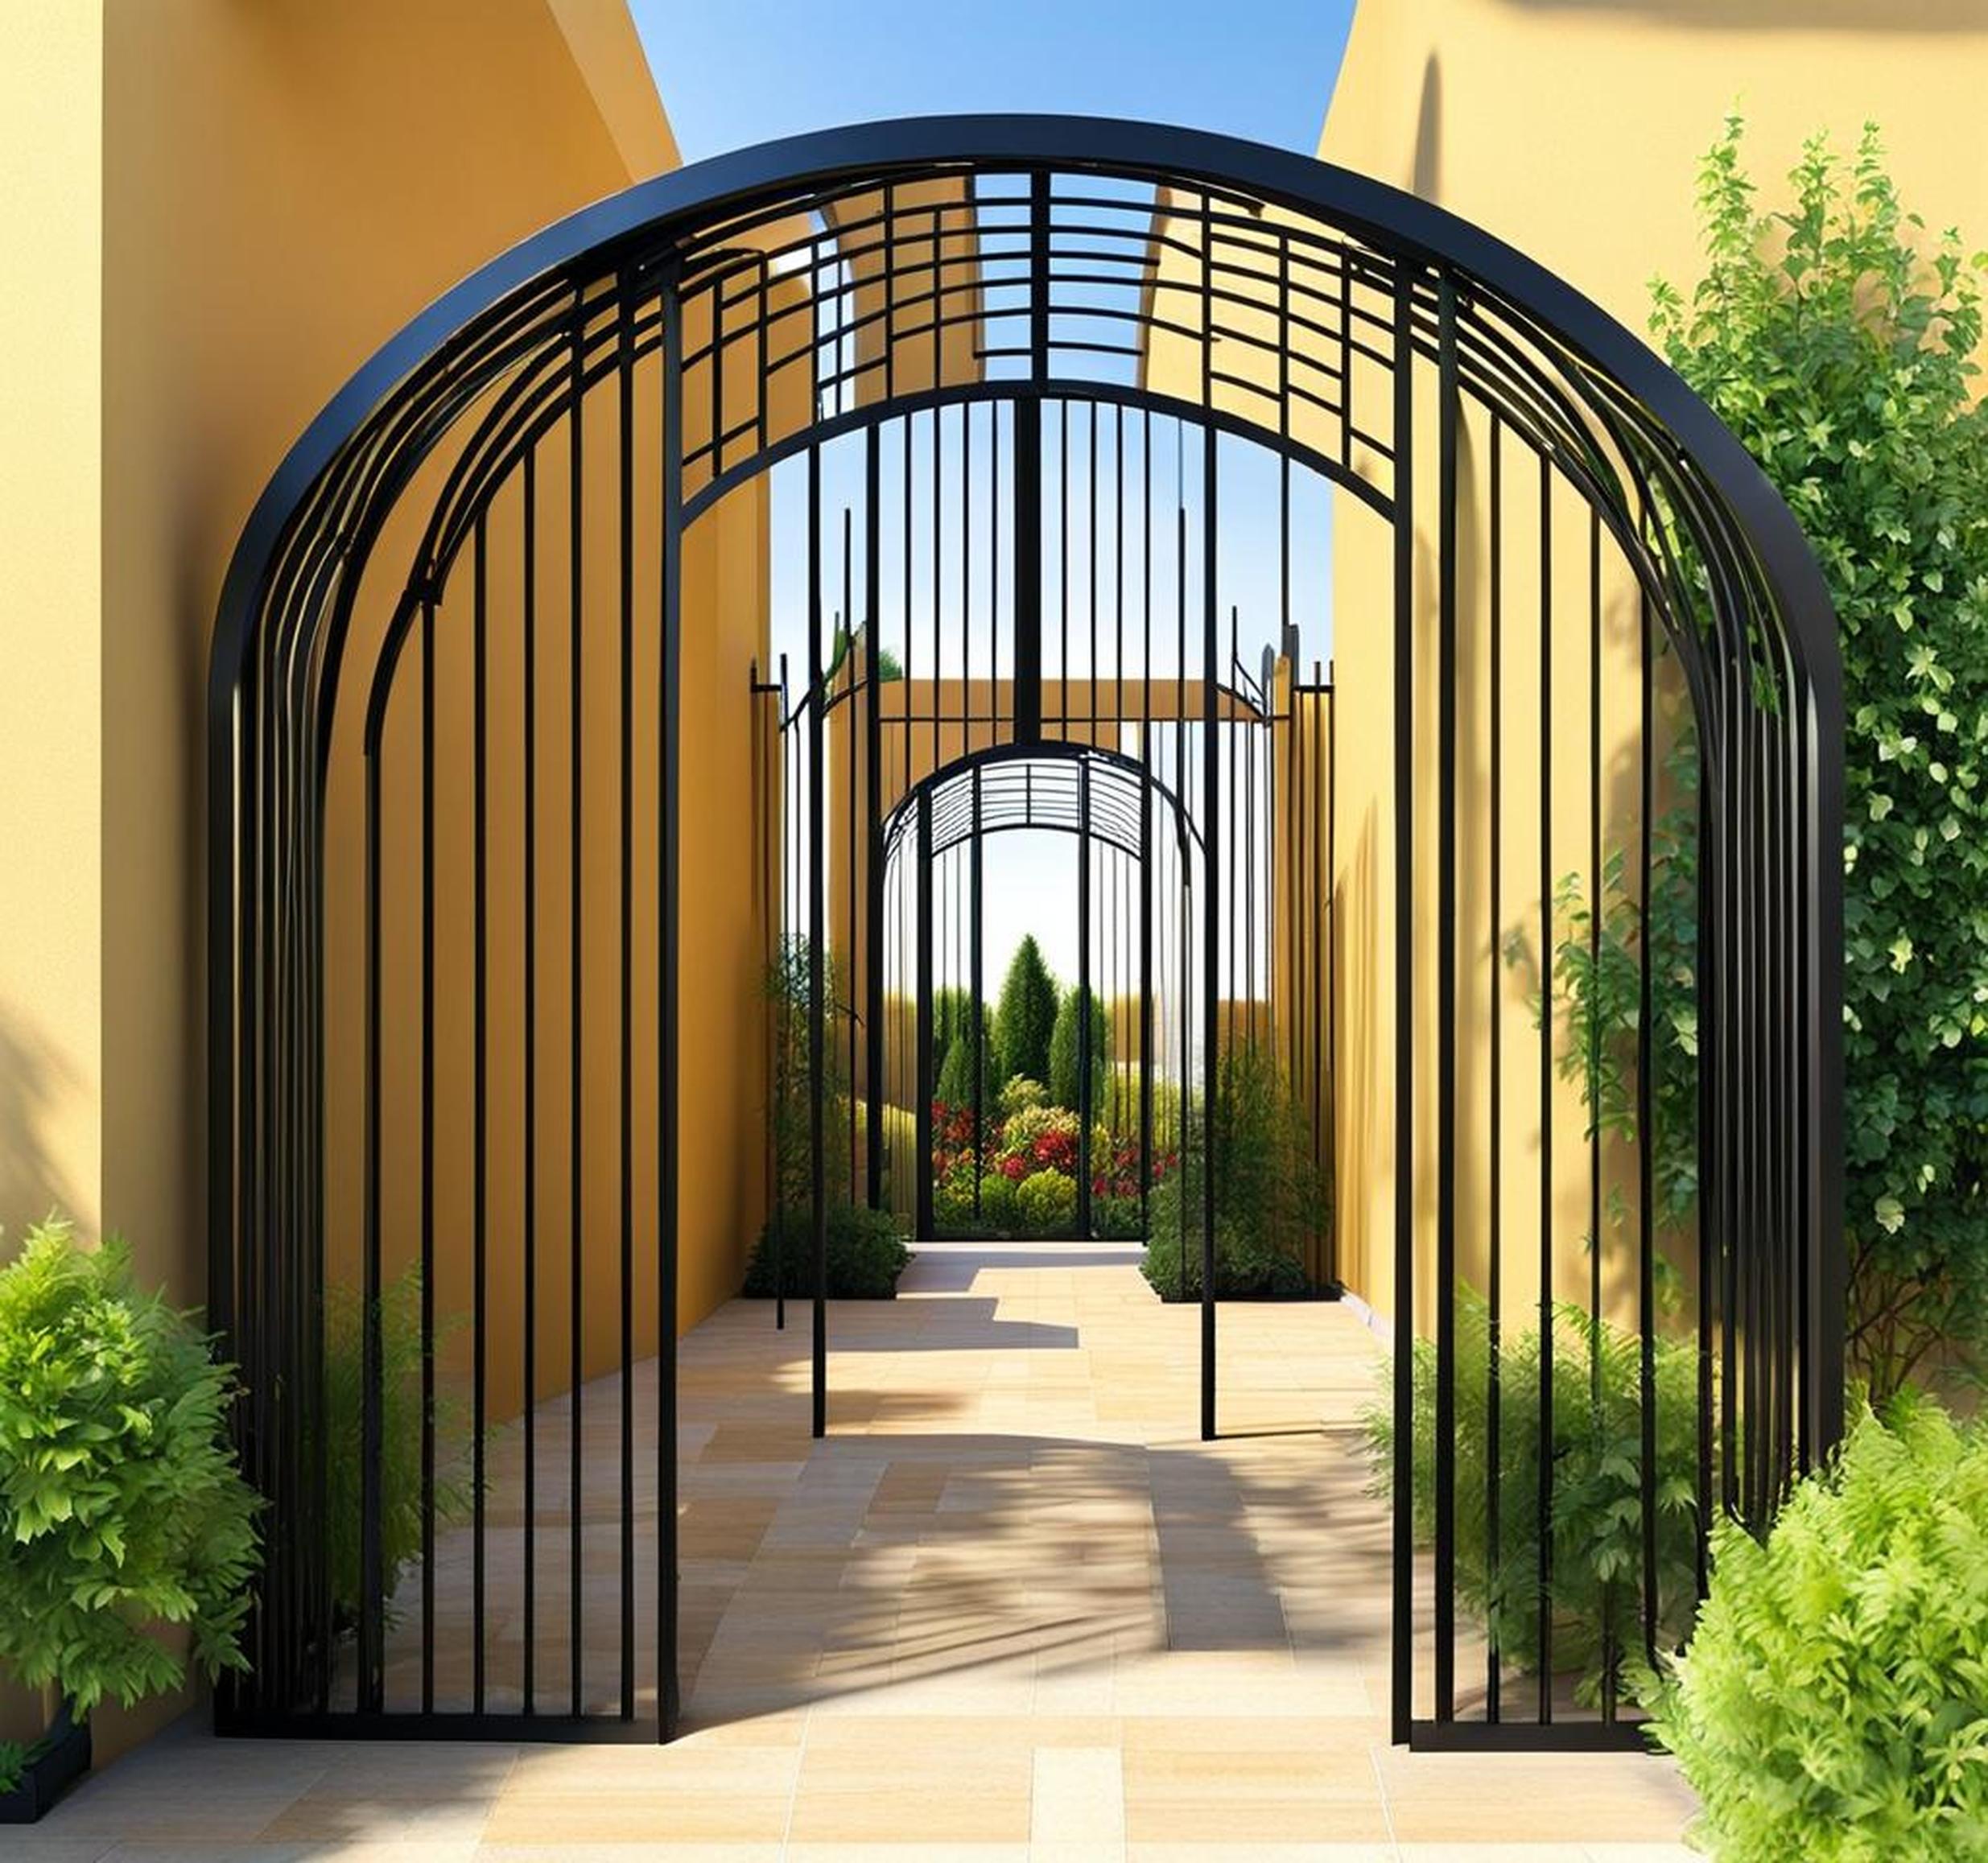 Make a Grand Entrance to Your Garden with Decorative Metal Archways